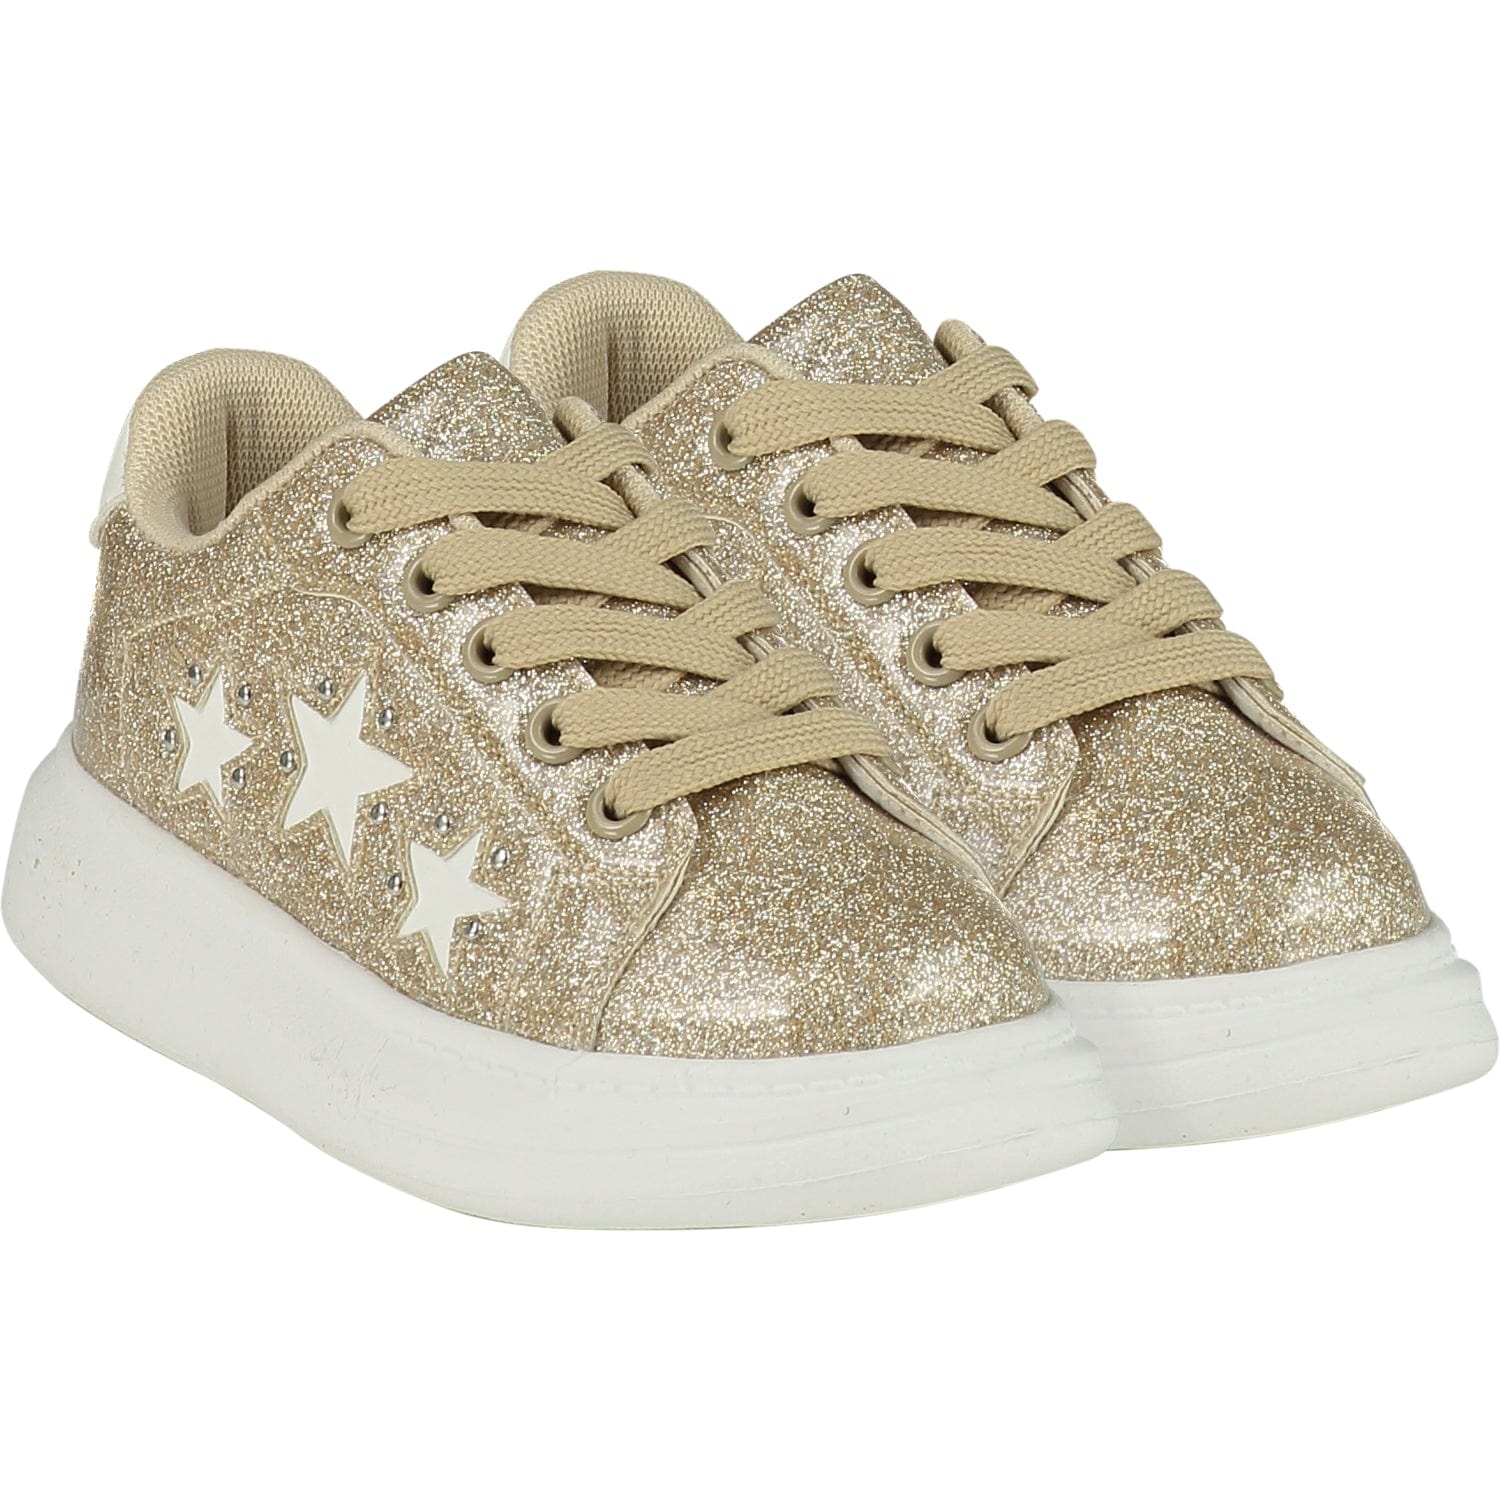 A DEE - Queeny Chunky Star Trainers - Light Gold